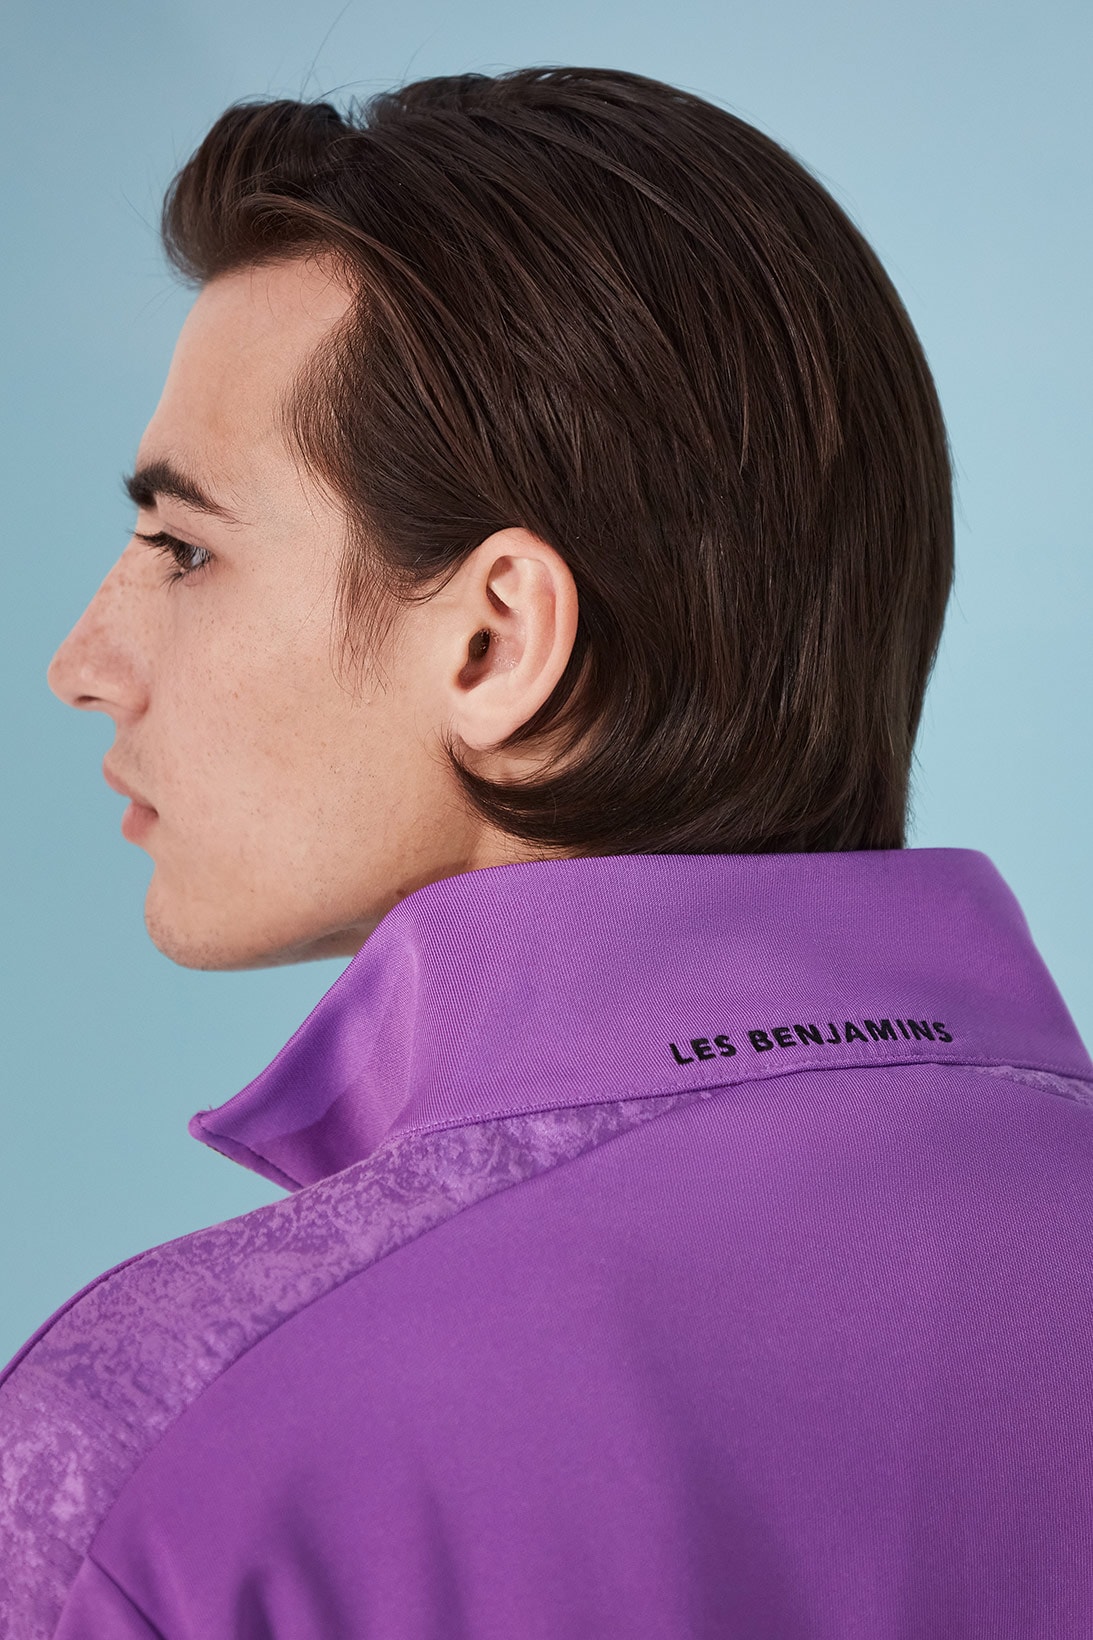 les benjamins silk road services spring summer collection campaign outerwear jacket